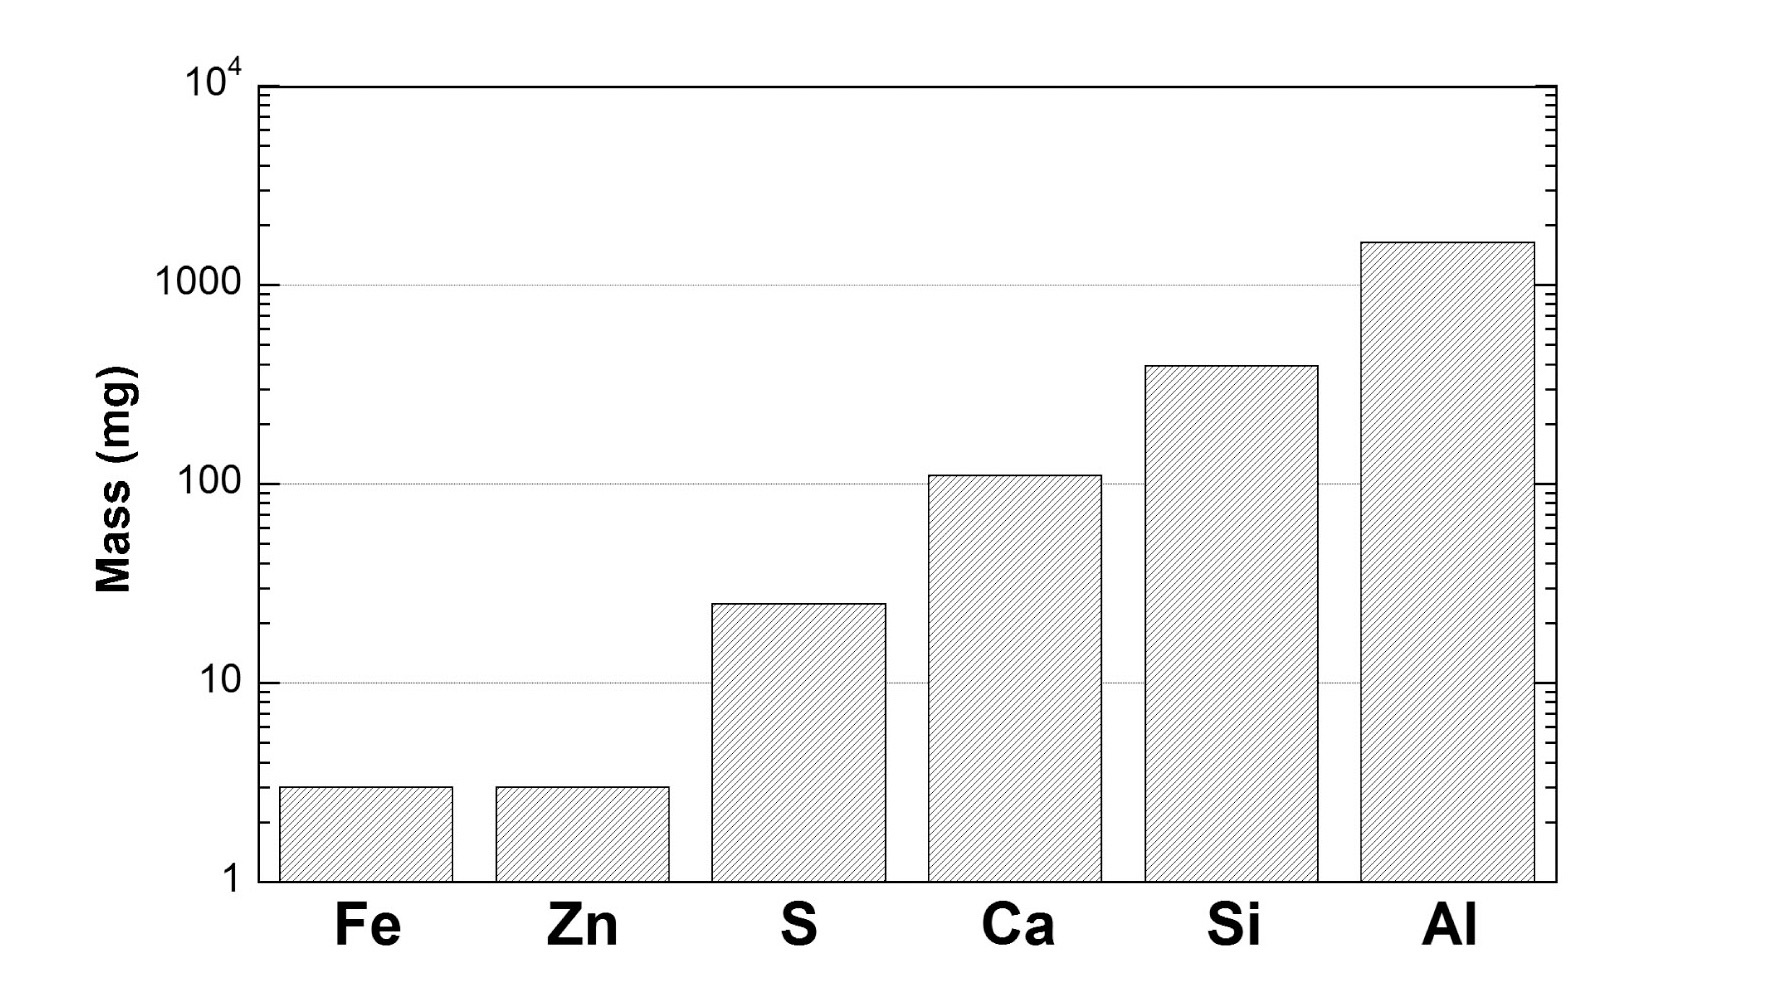 Comparison of Total Mass Released during Dissolution Testing by Element [12].